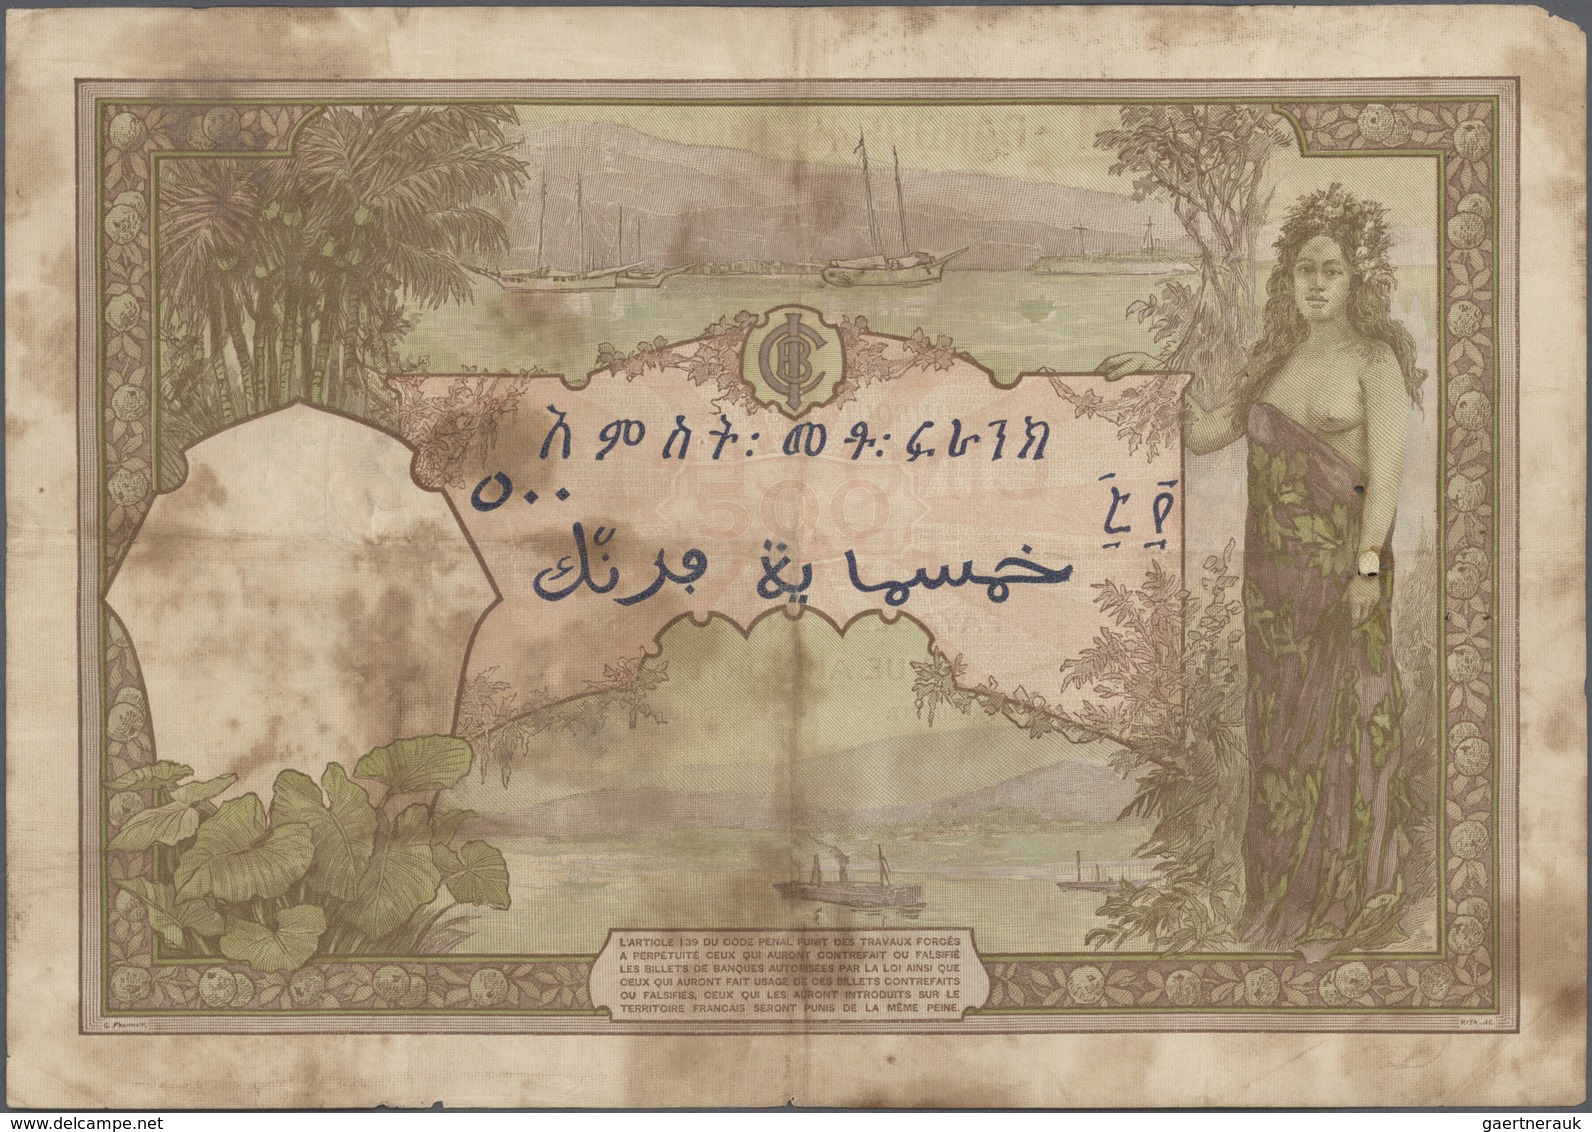 French Somaliland / Französisch Somaliland: Pair Of 2 Notes Containing Banque De L'Indochine With Is - Sonstige – Afrika